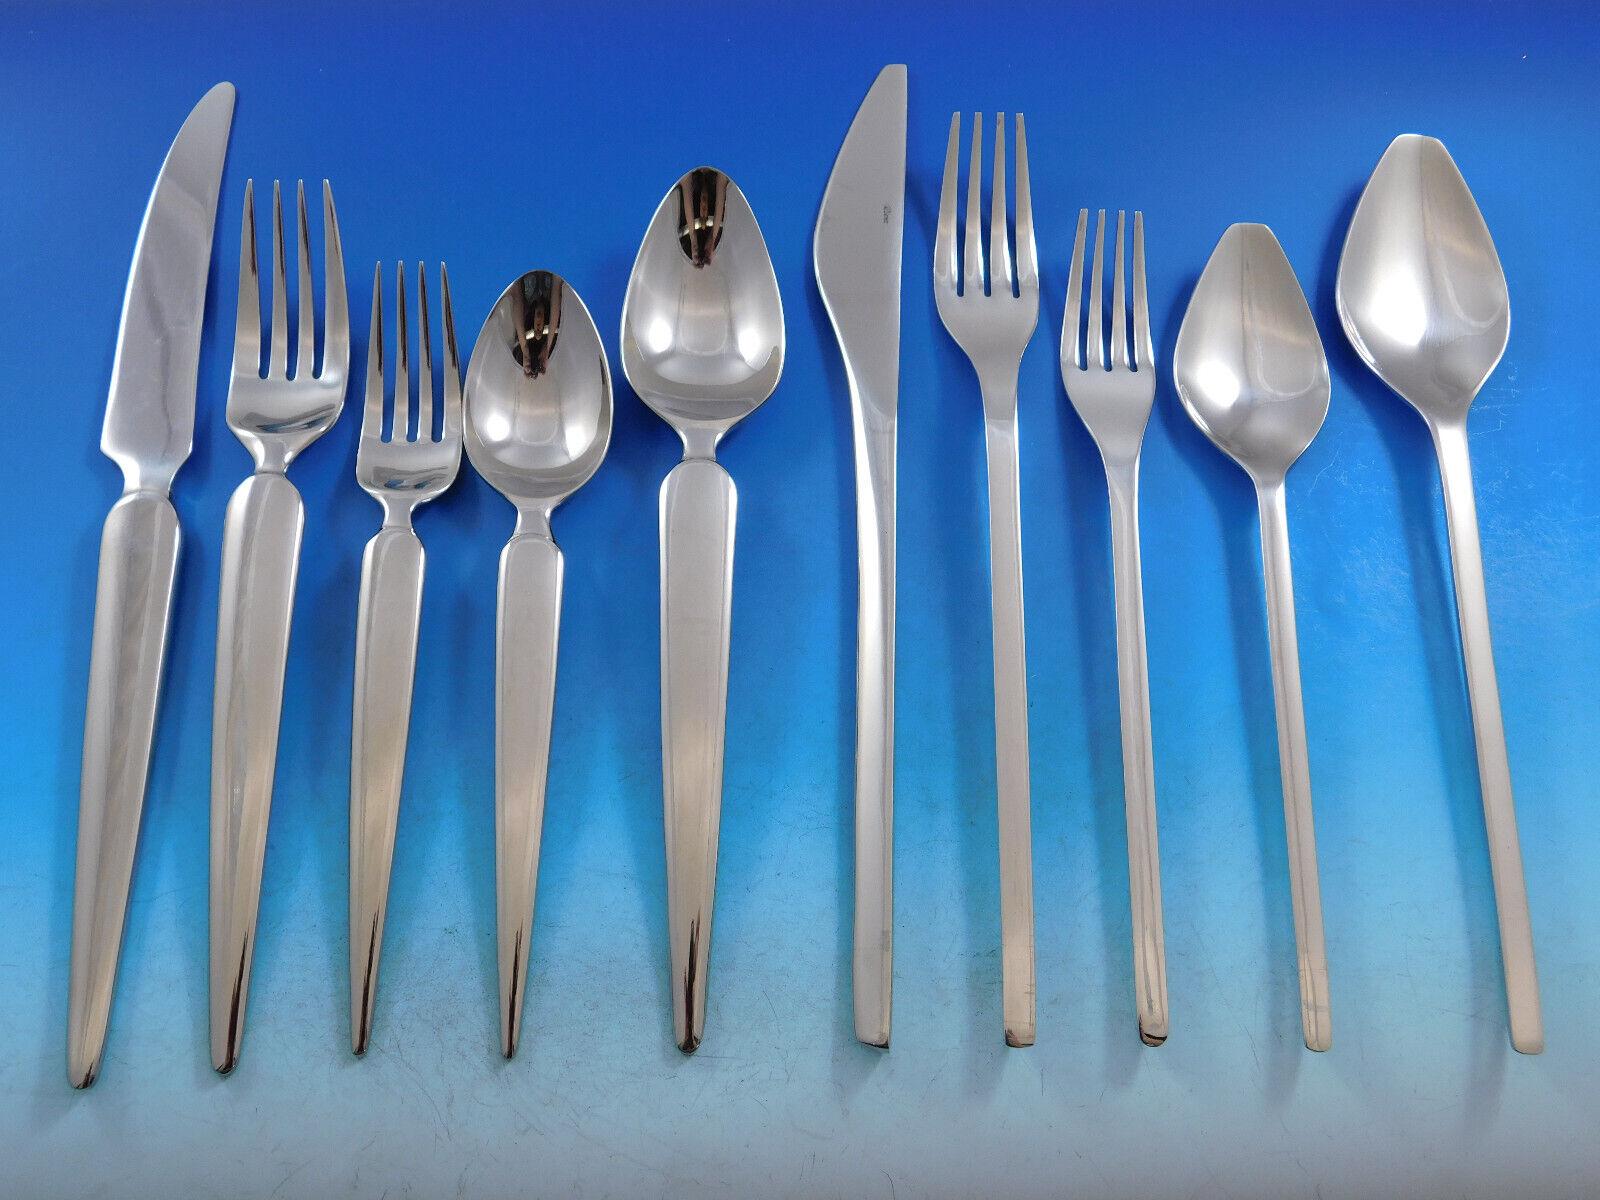 Designer Mixed Stainless Steel Flatware Set #4 Service 62 Pieces Modern Unused In Excellent Condition For Sale In Big Bend, WI